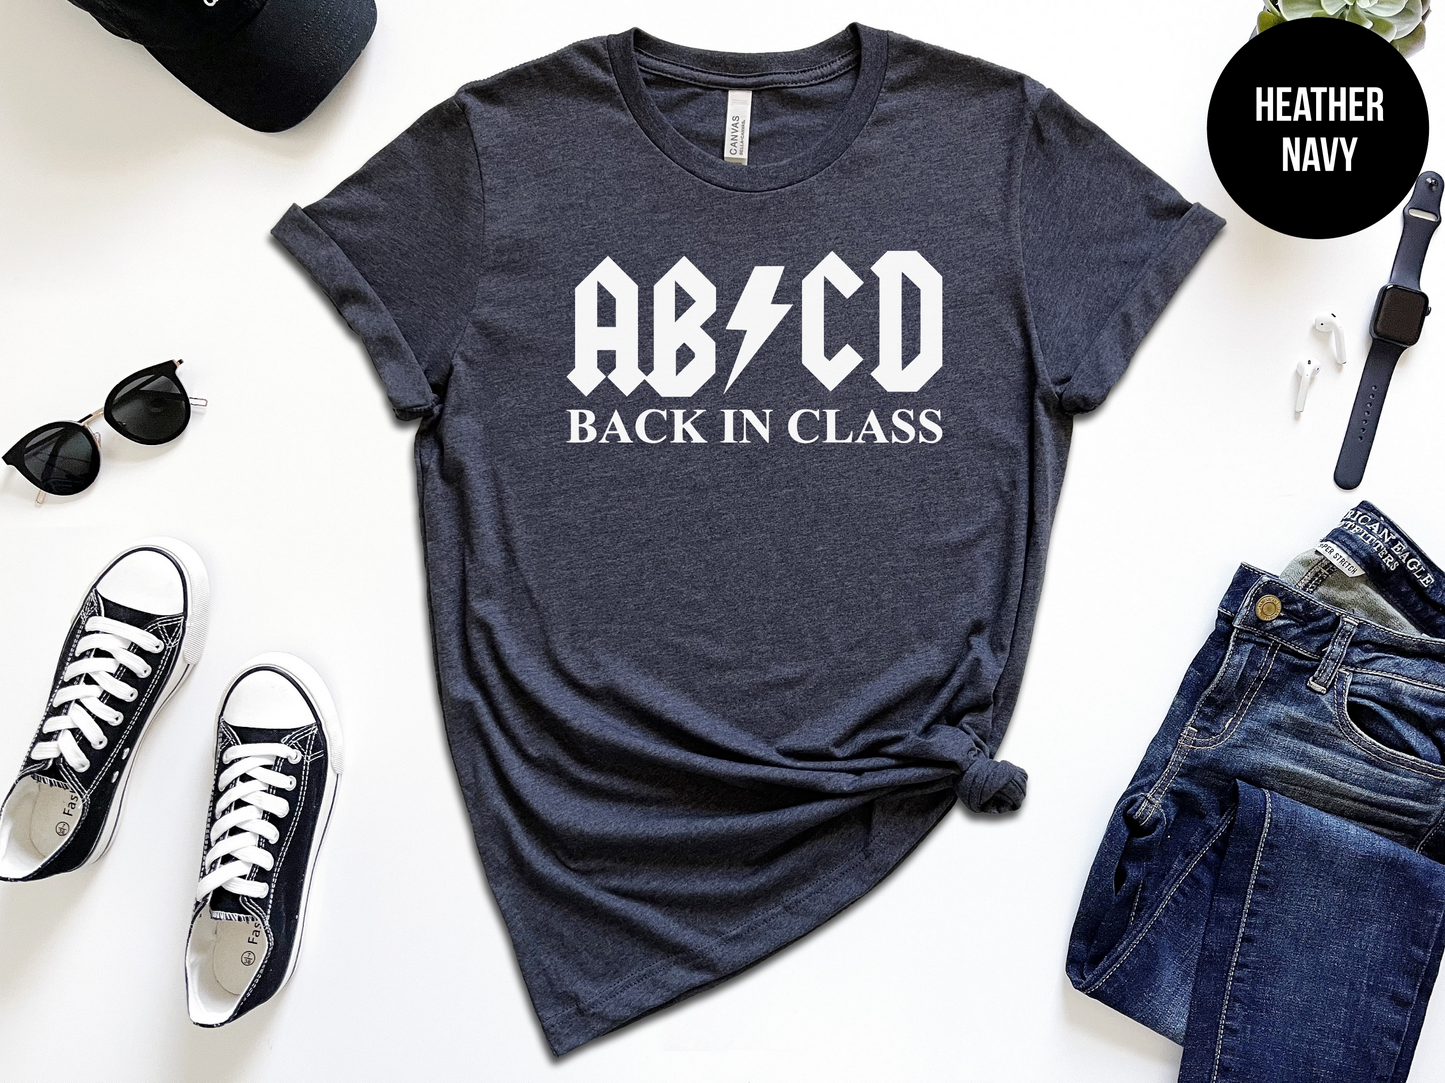 ABCD Back In Class